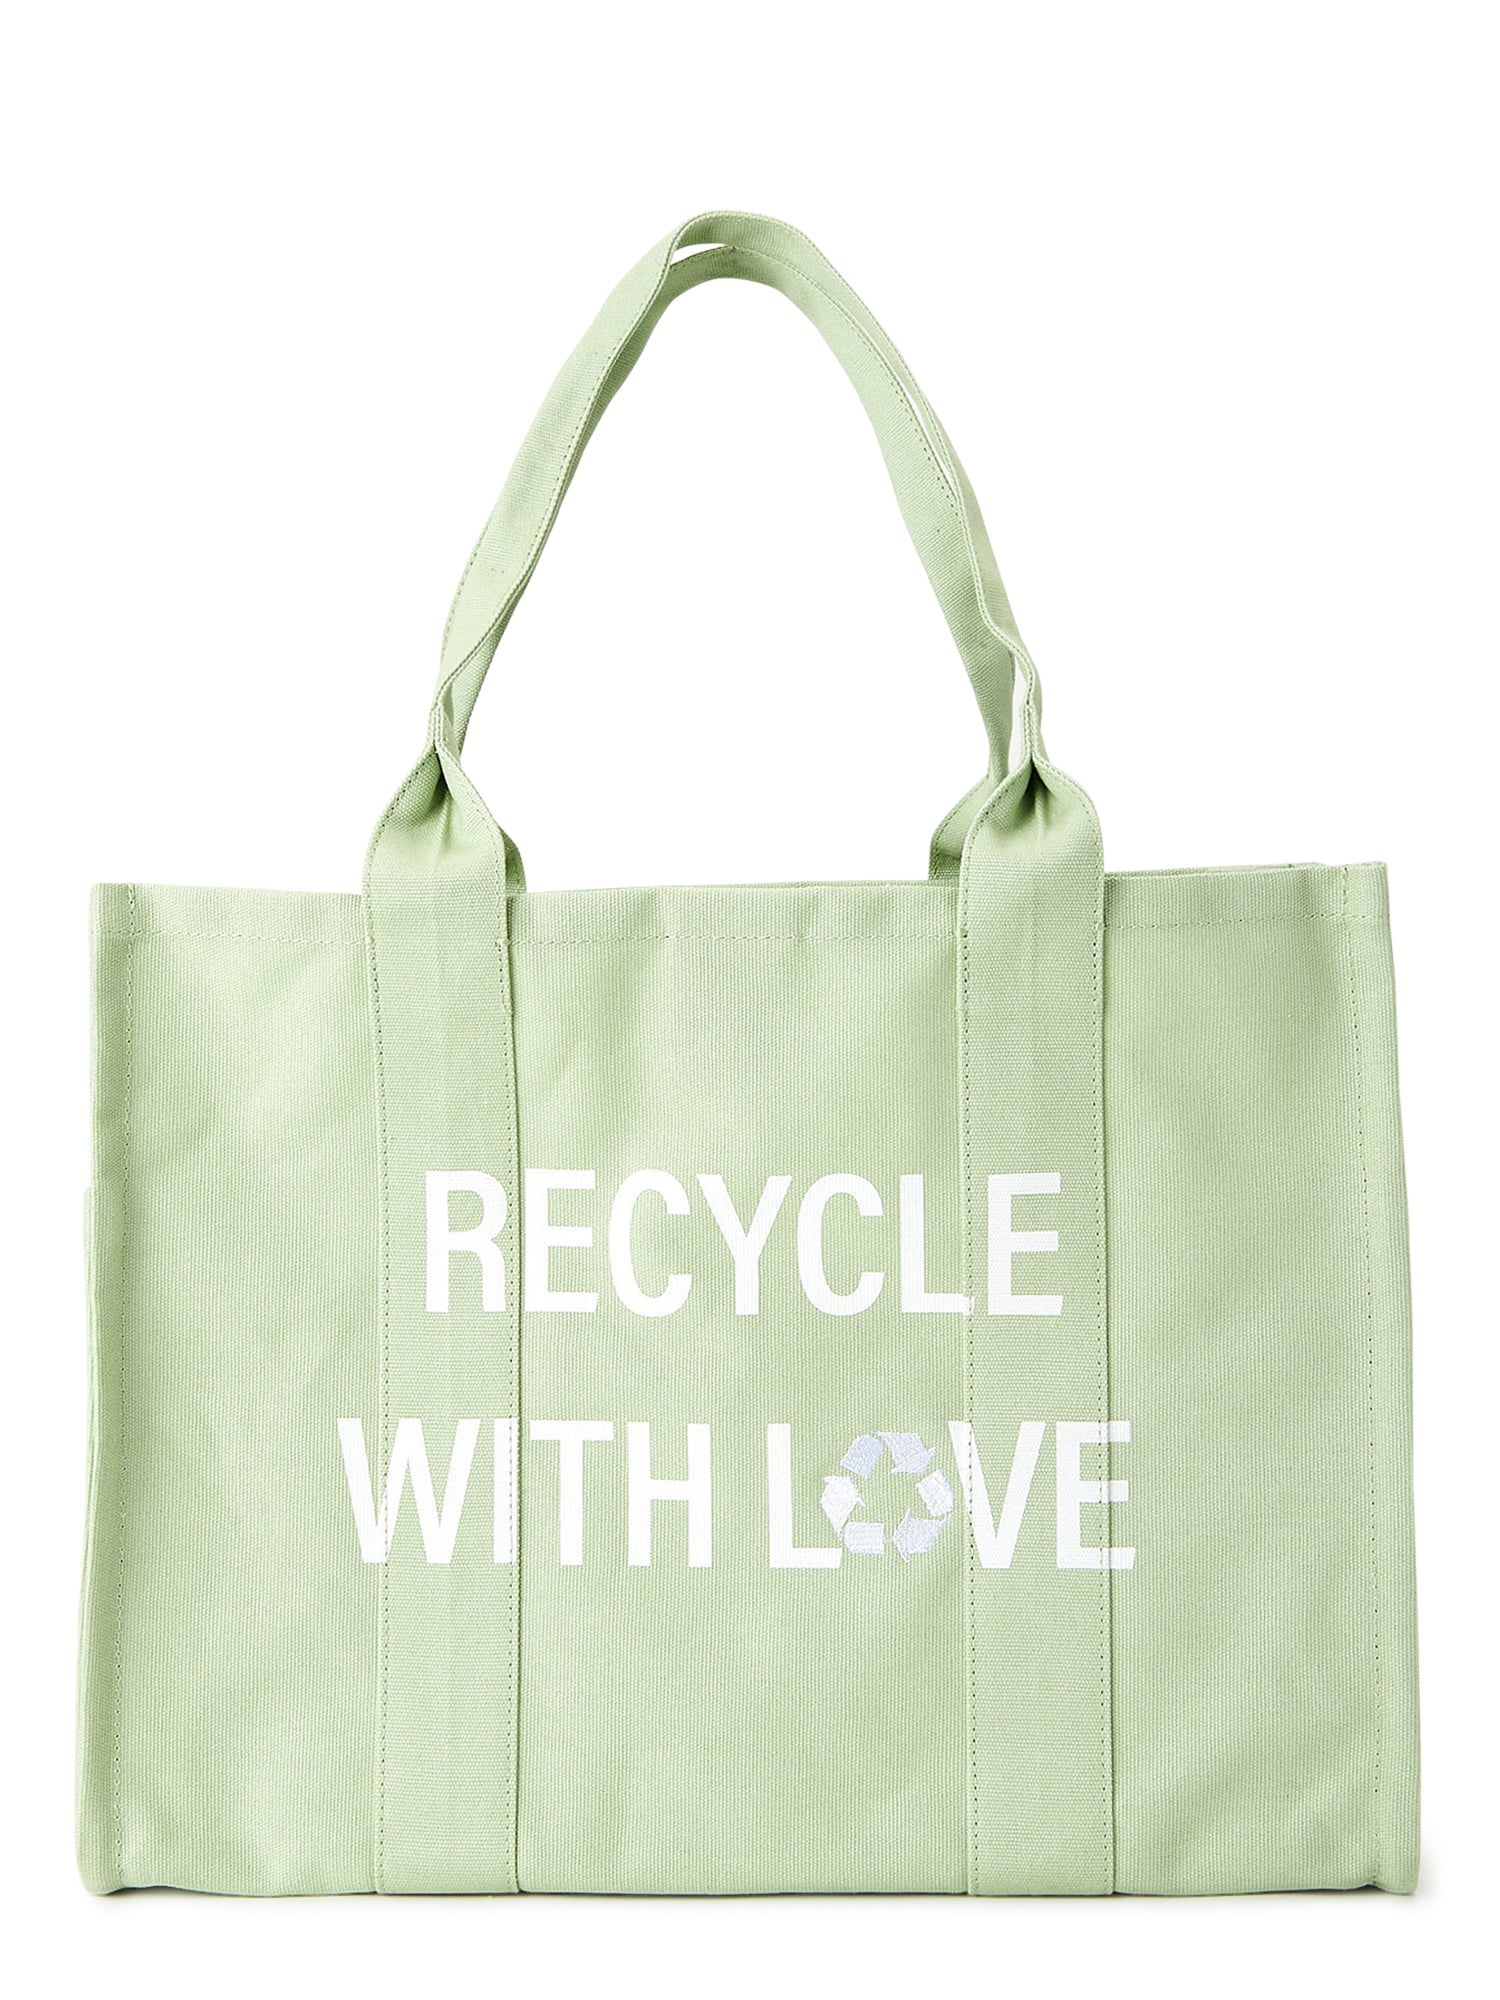 Time and Tru Women's Elevated Canvas Tote Bag Soft Cleadon Recycle with Love | Walmart (US)